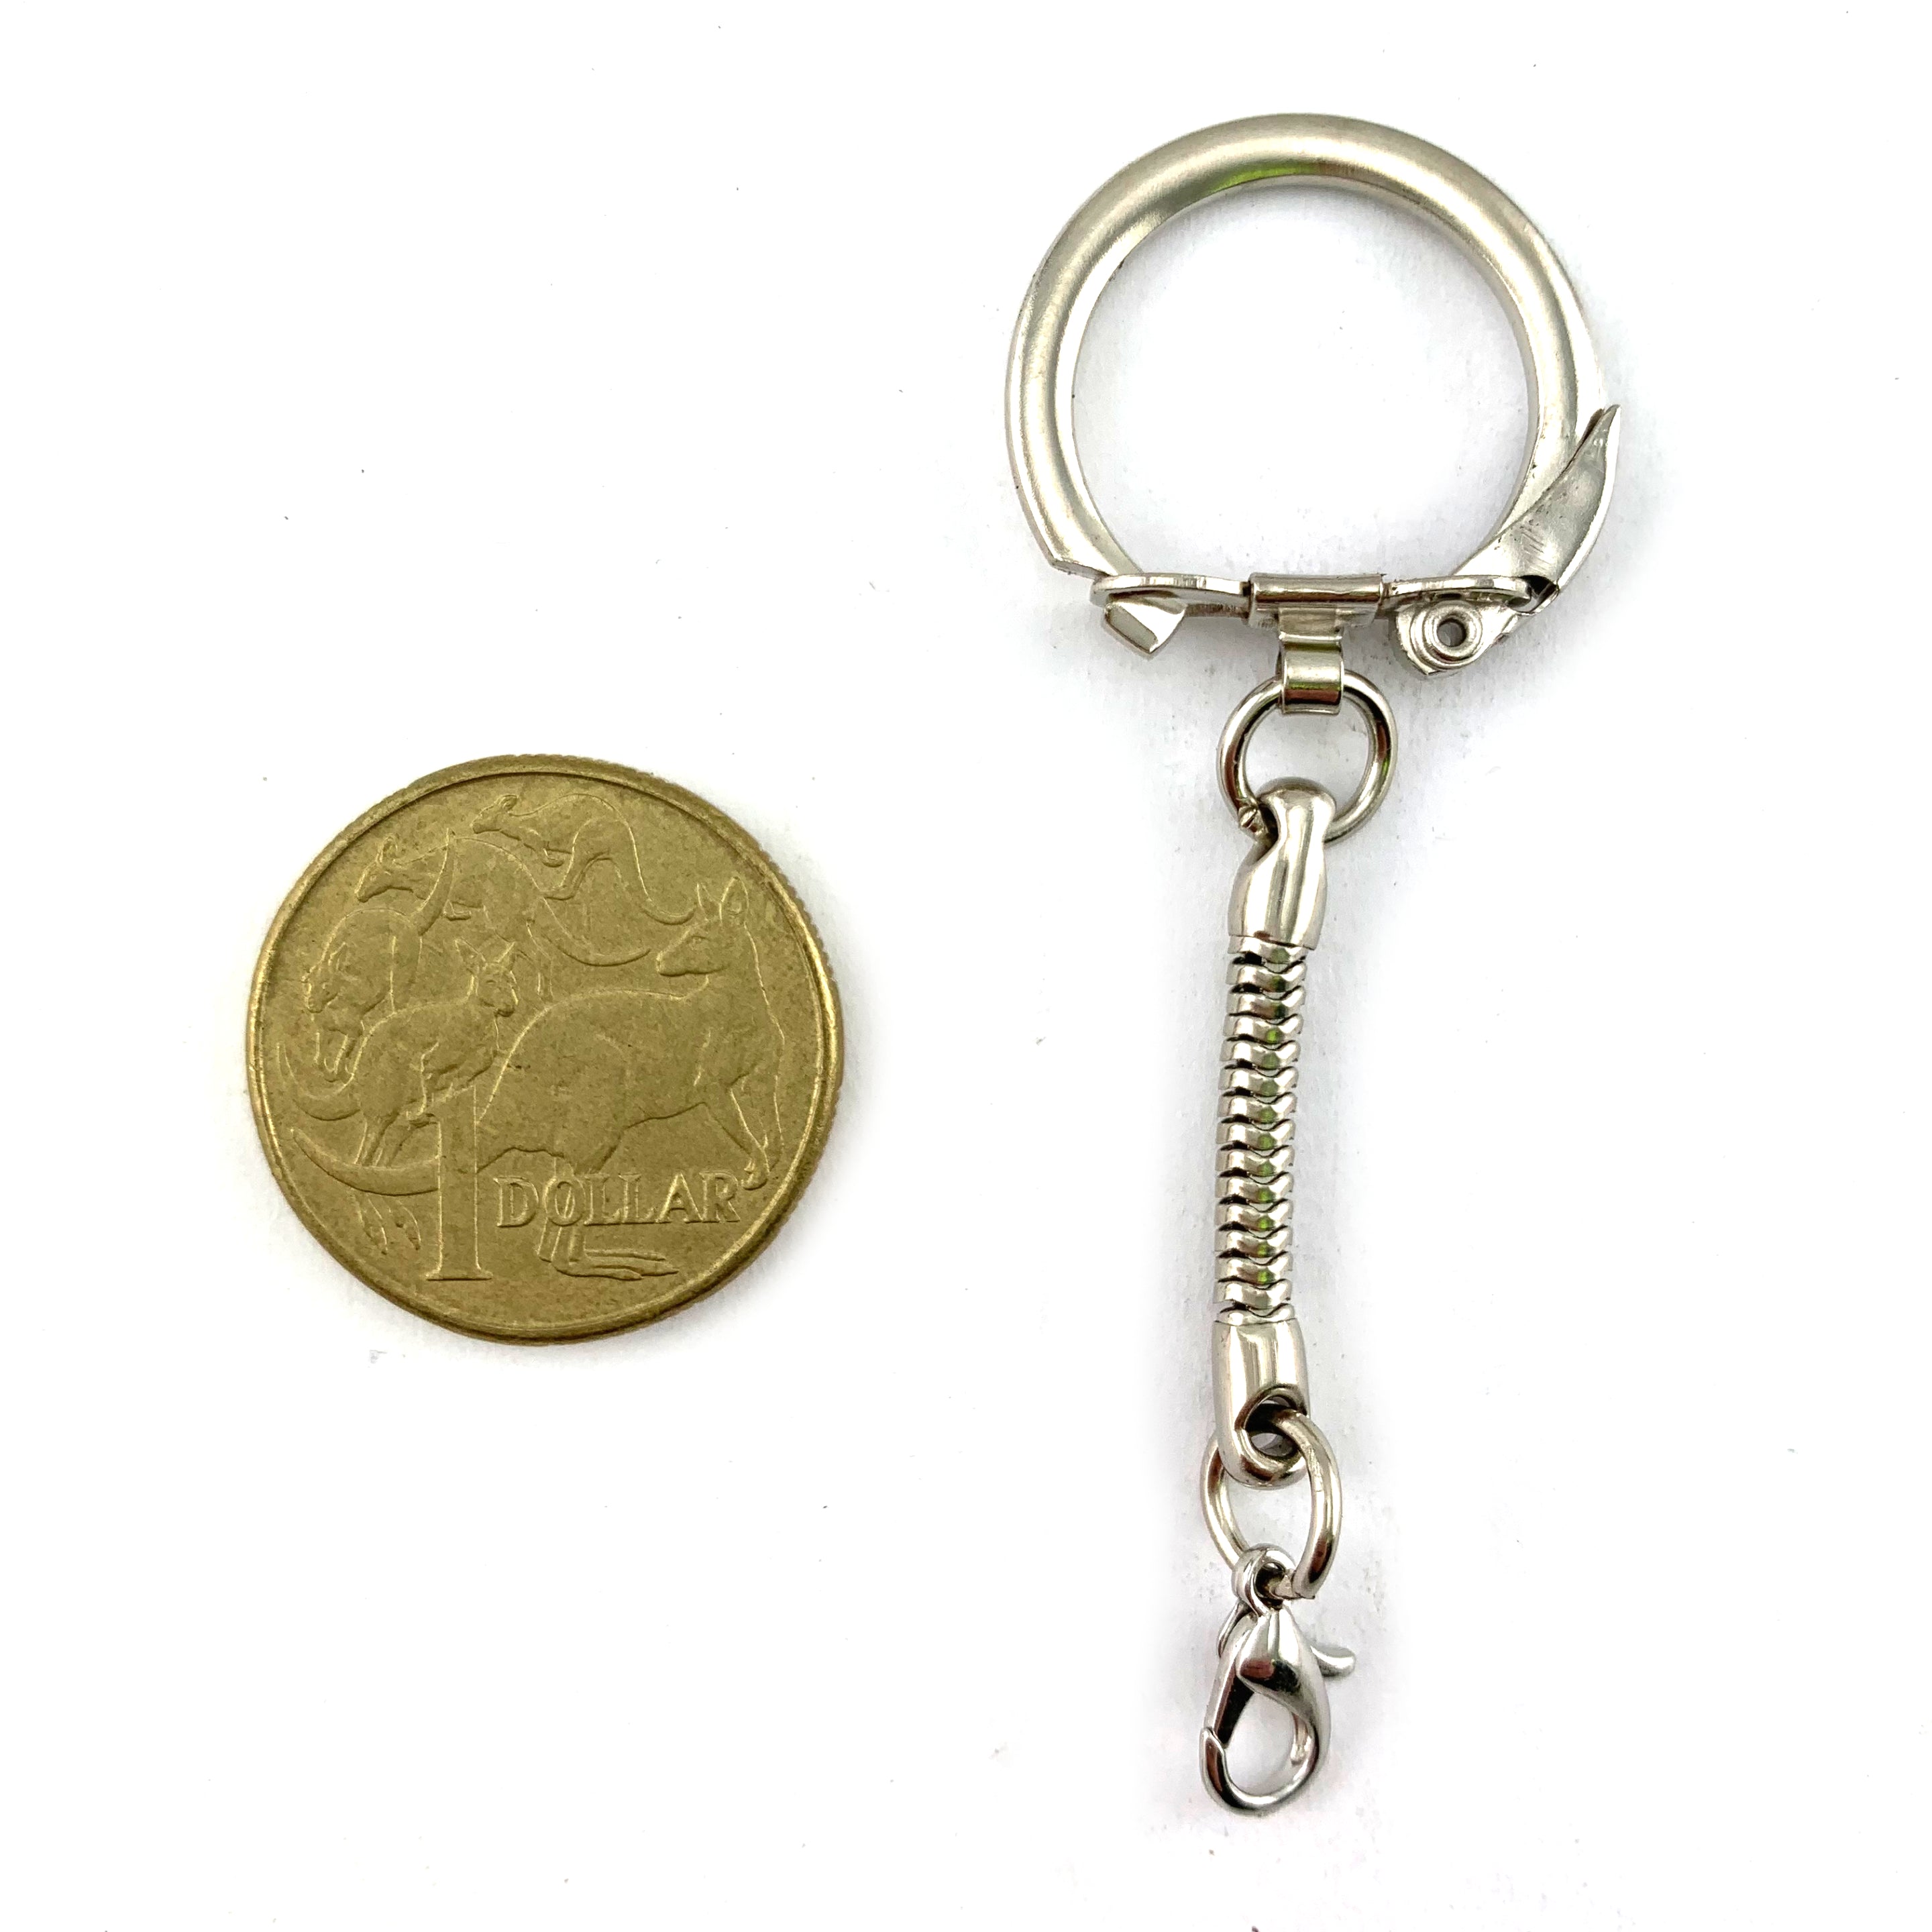 Nickel key chains with a beautiful high polished finish, packaged in bags of 100. Melbourne and Australia wide.